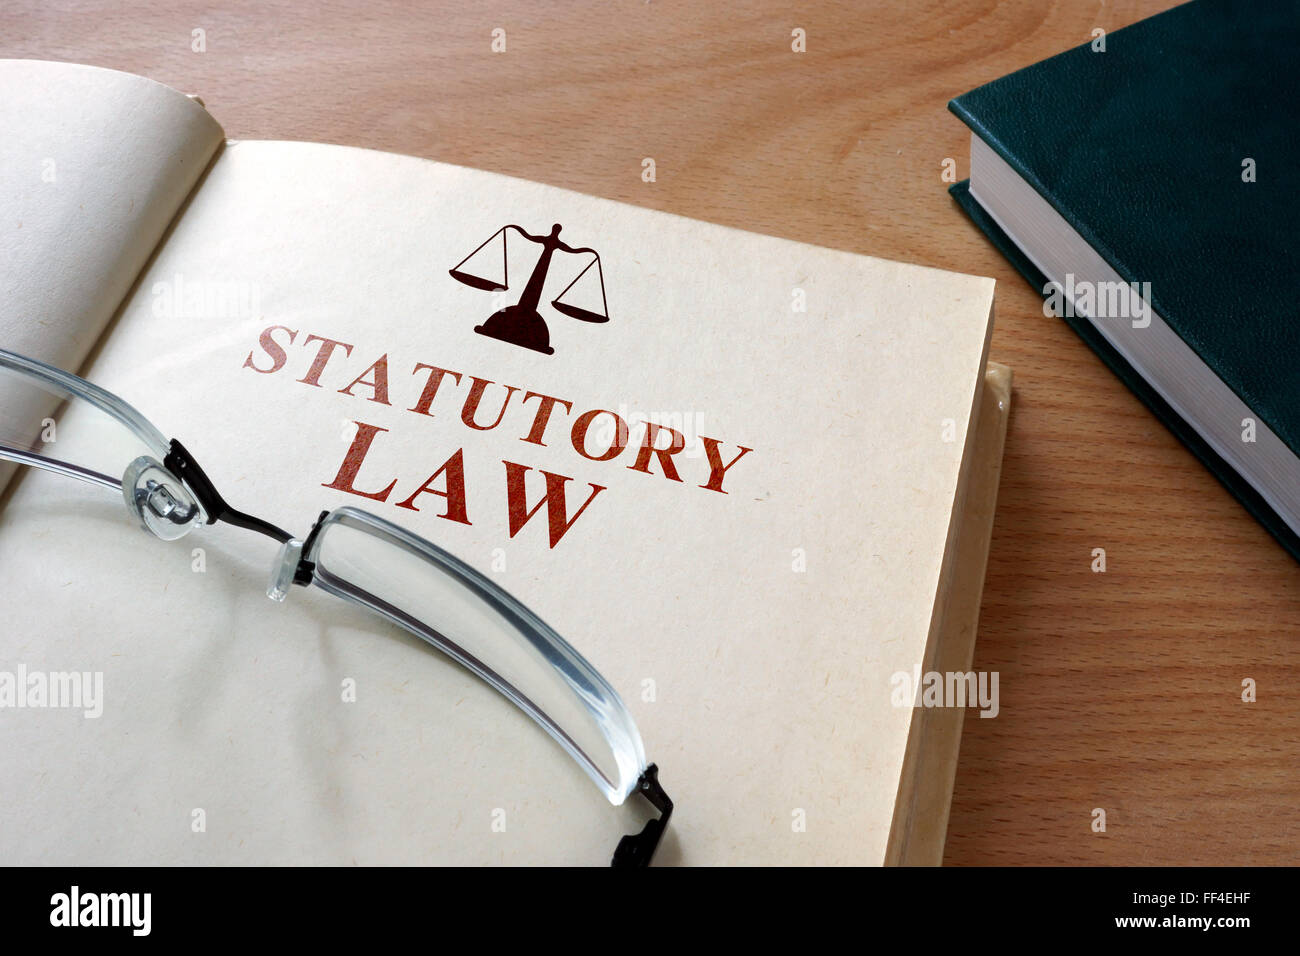 Code of   statutory law on a wooden table. Stock Photo